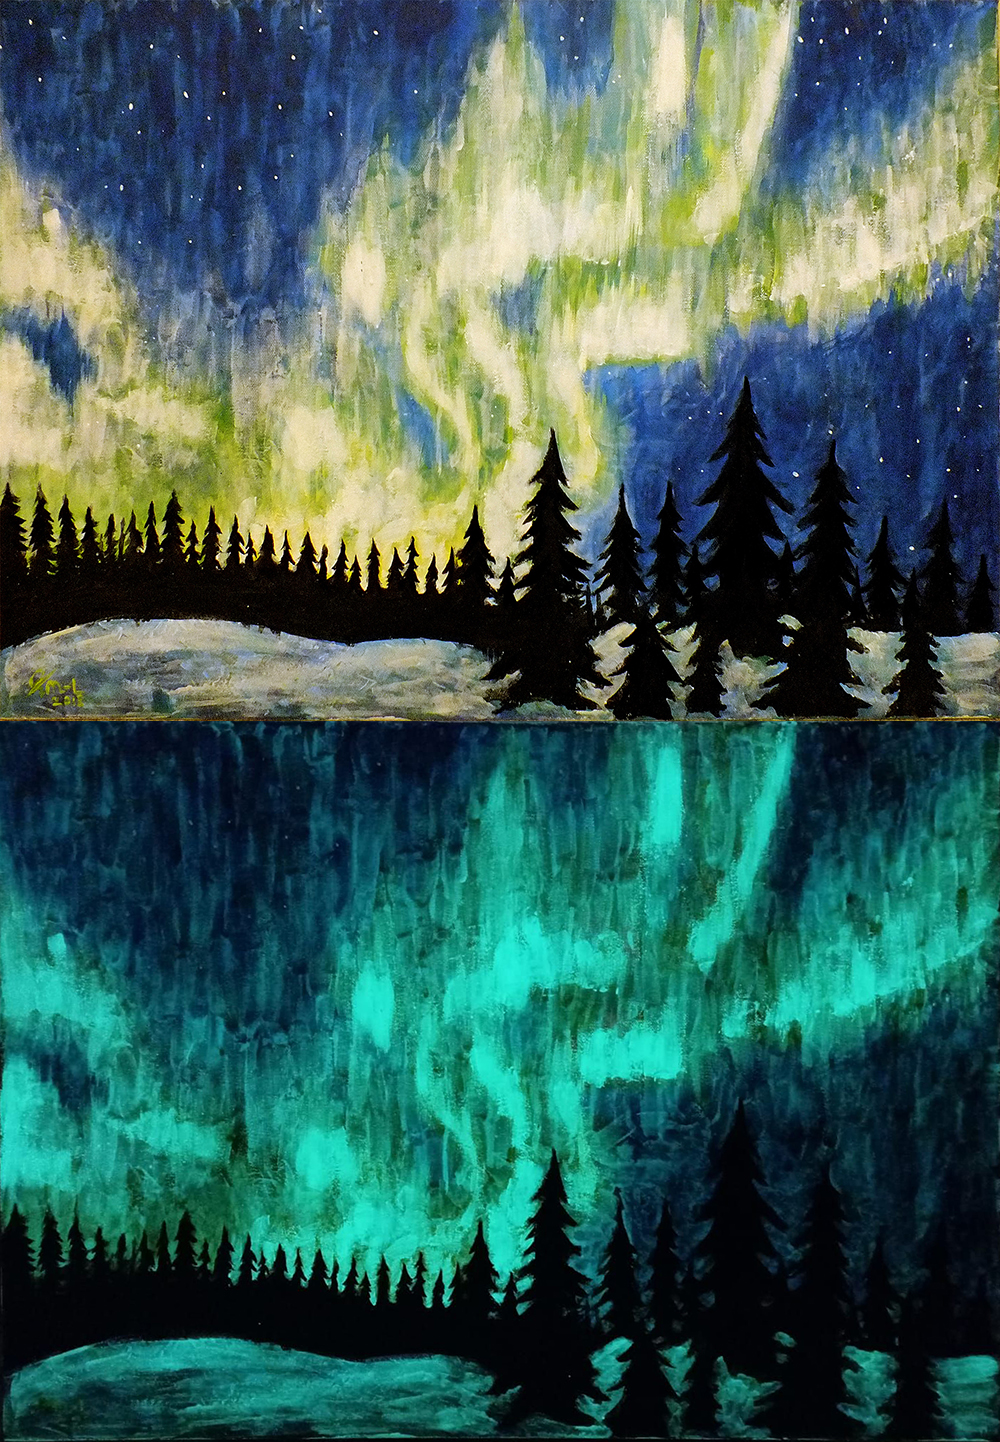 Update! Aurora Borealis - day and night FOR SALE